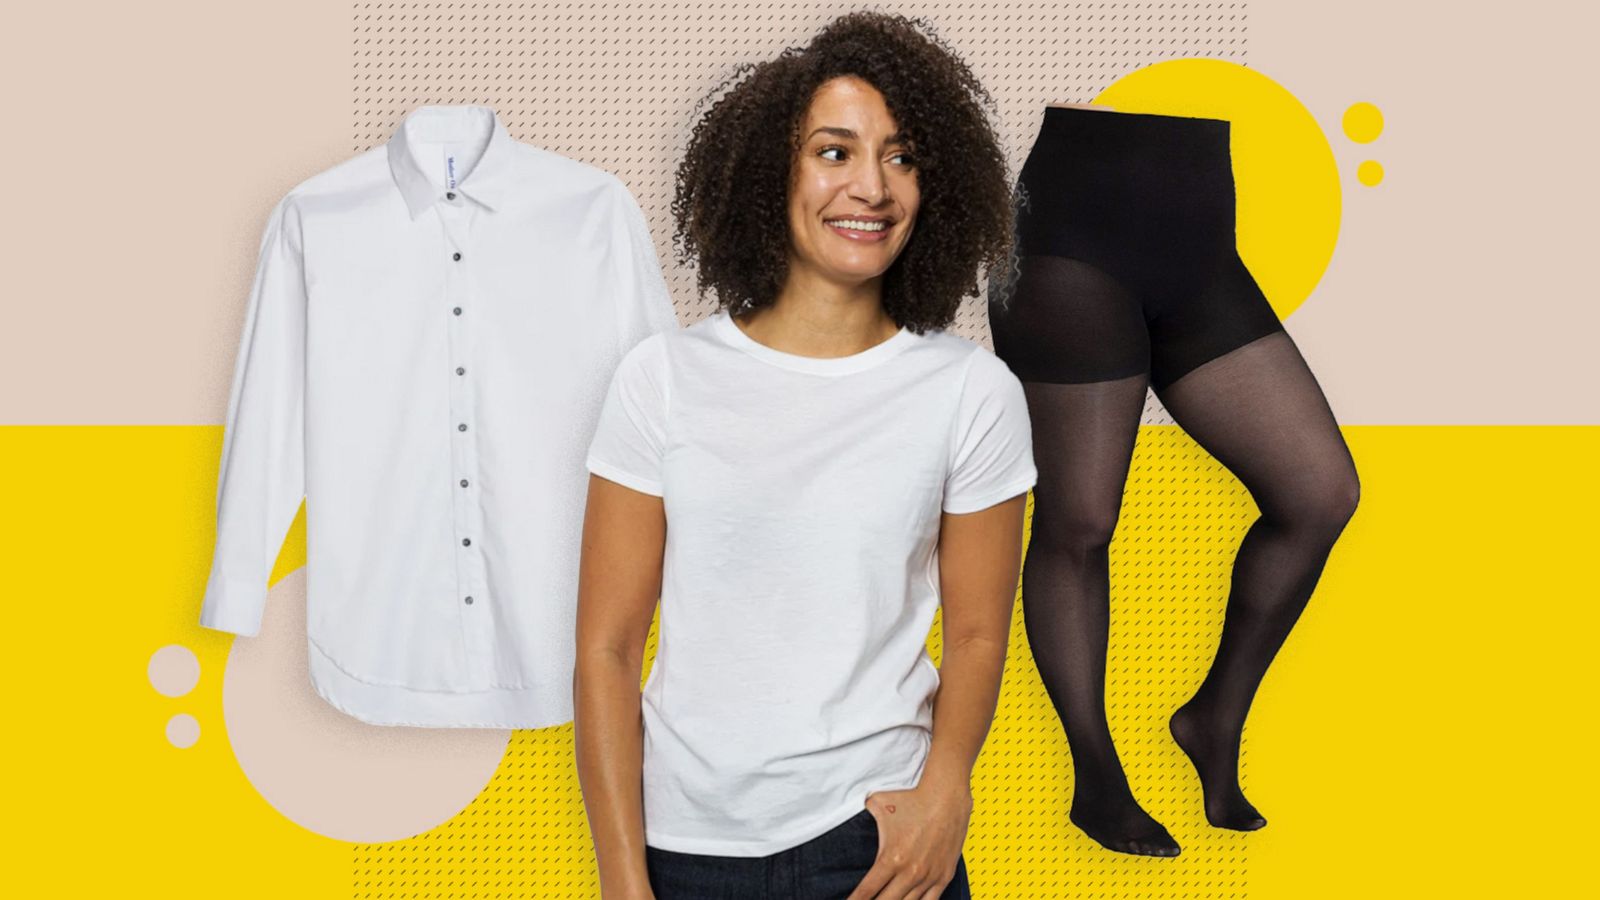 Try Before You Buy': Rip-resistant tights and stain-resistant